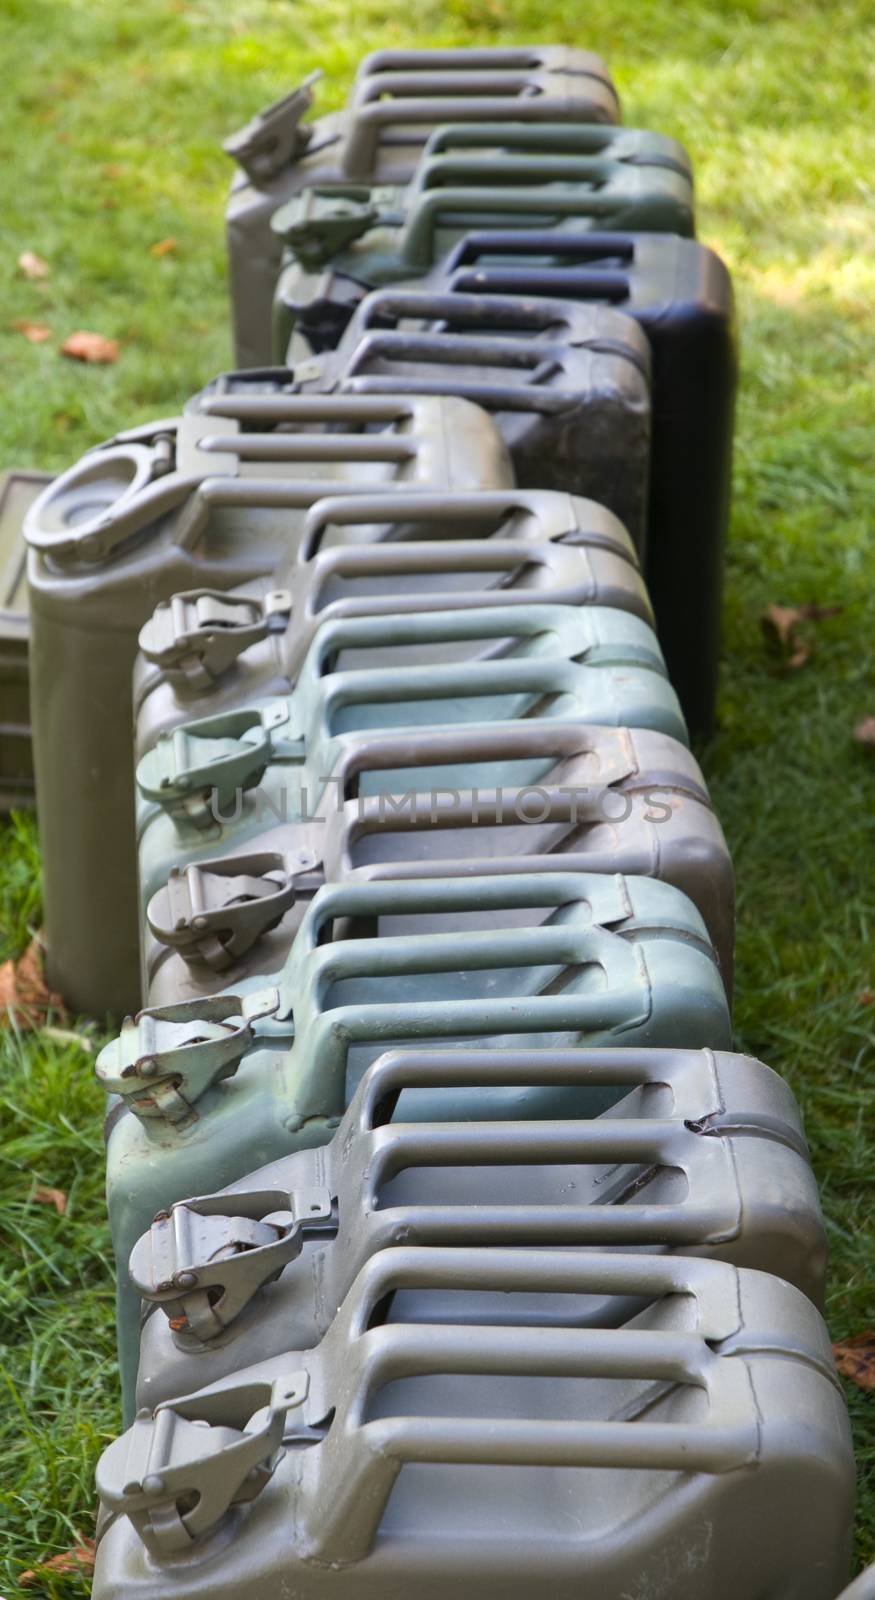 Row of Jerry Cans by TimAwe